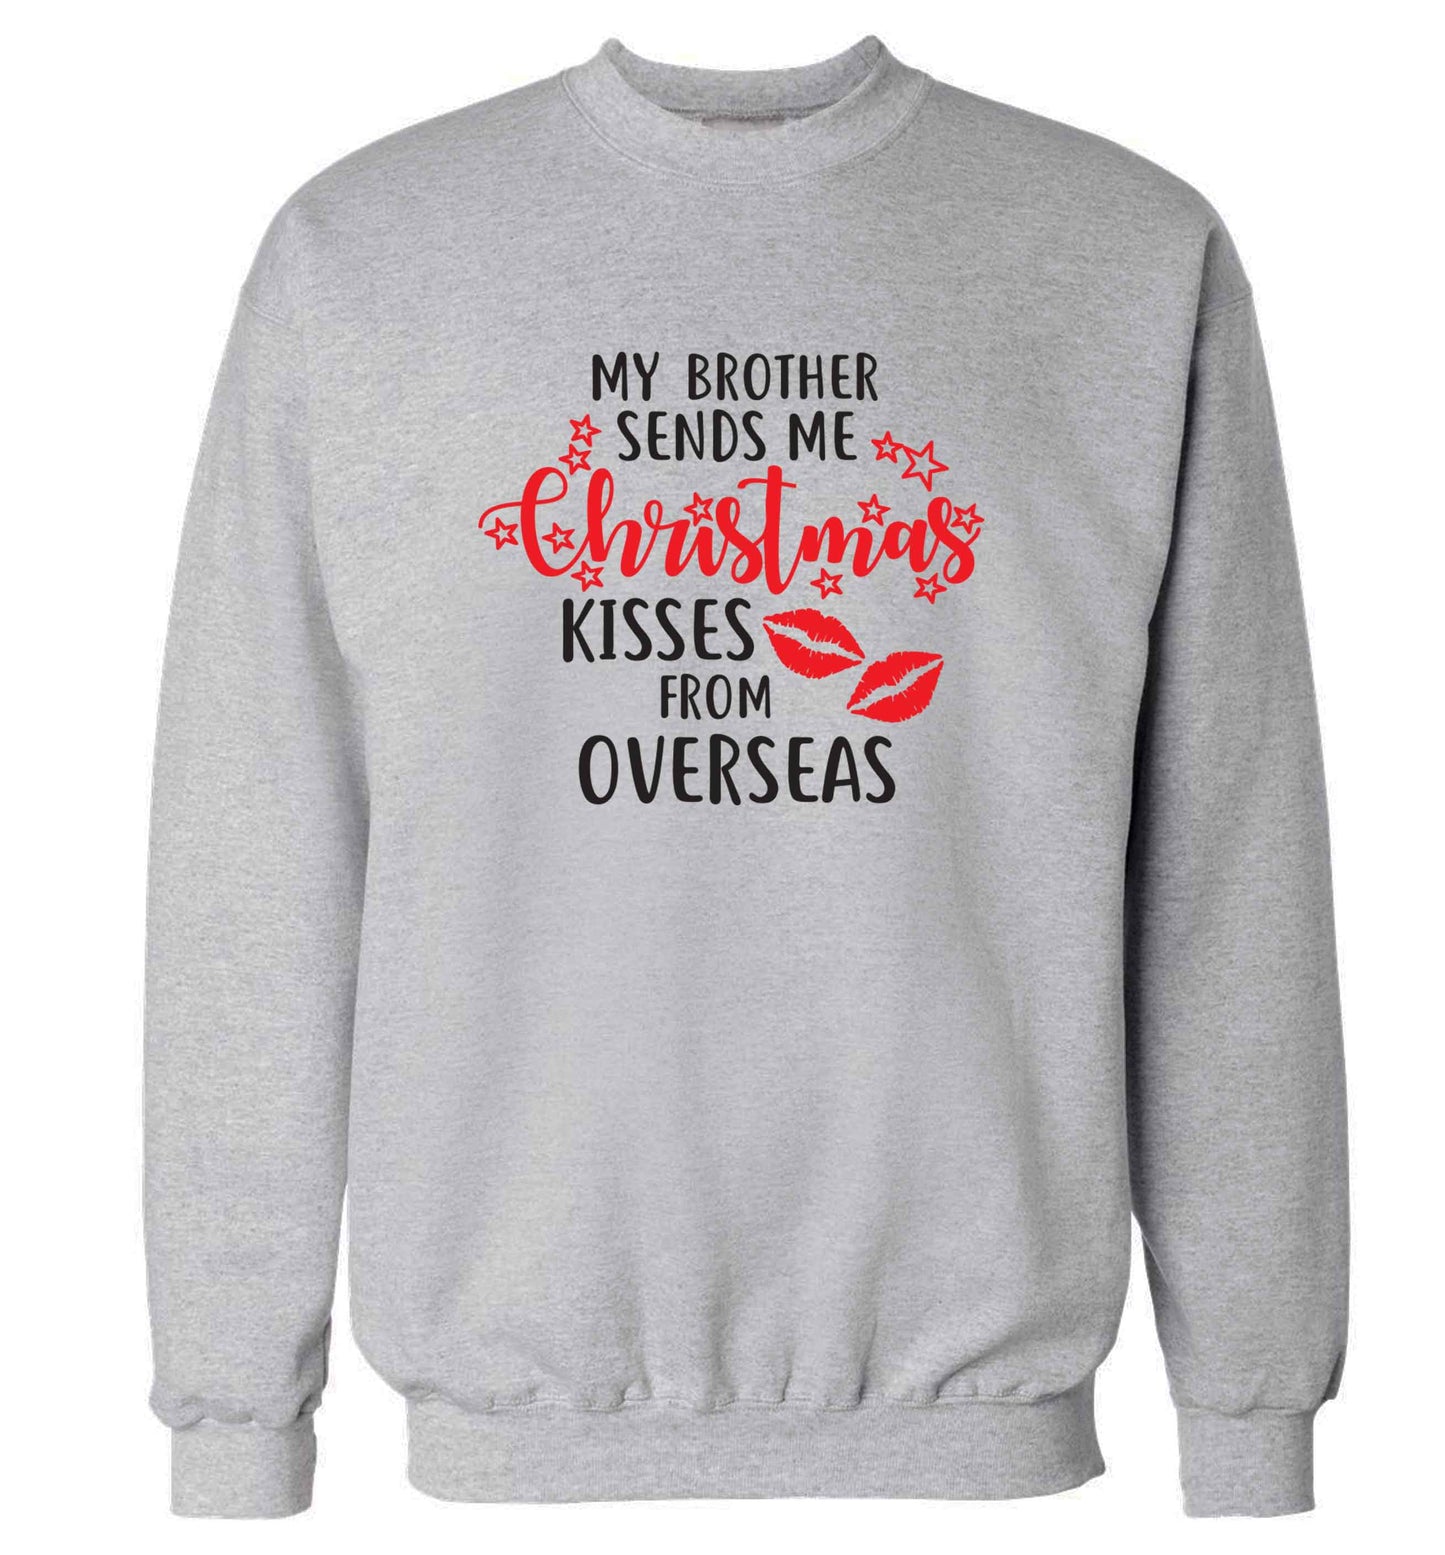 Brother Christmas Kisses Overseas adult's unisex grey sweater 2XL